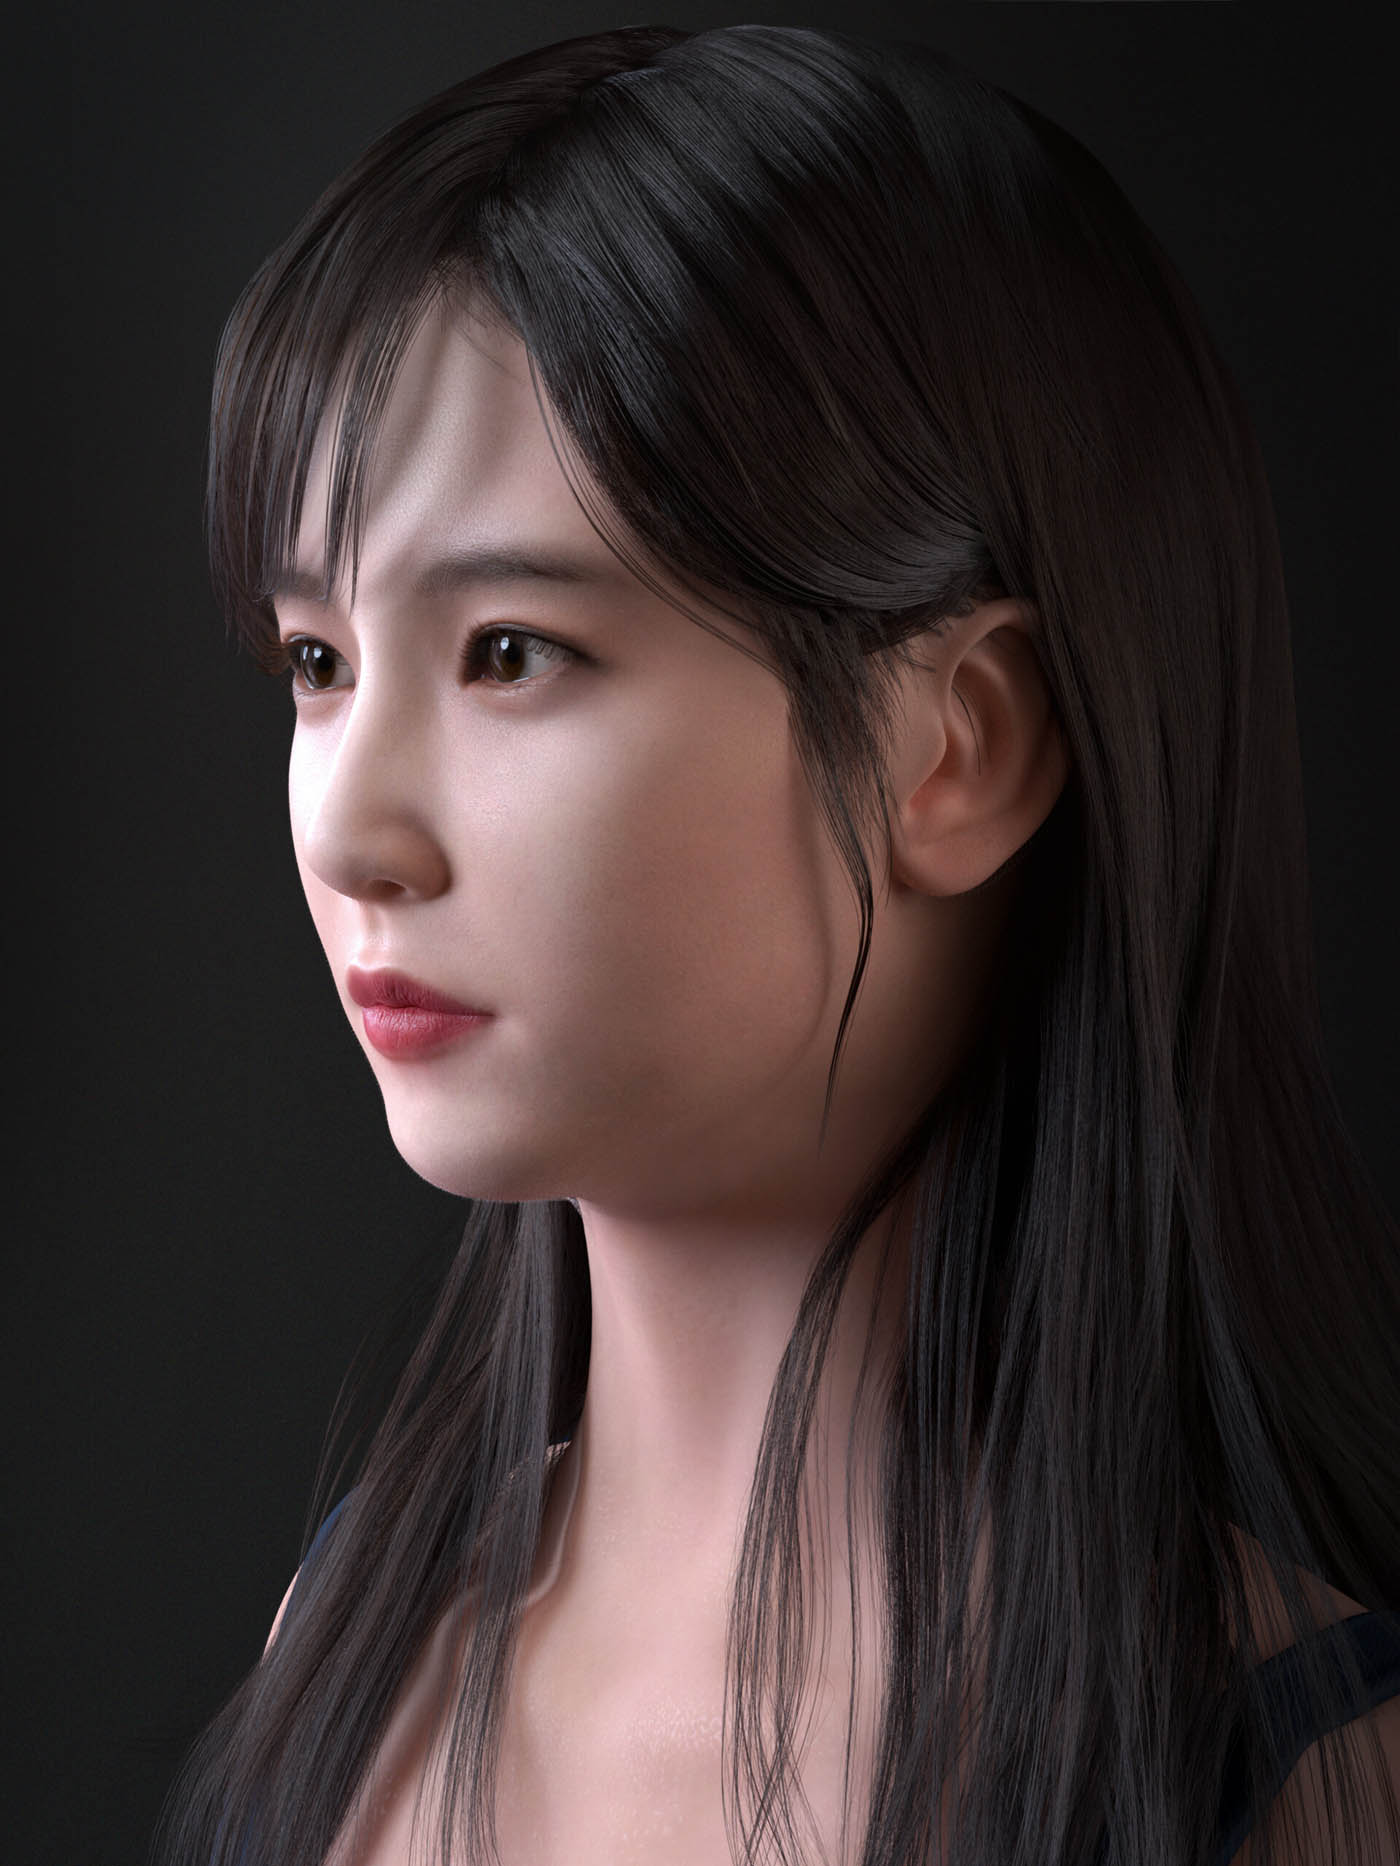 3d model woman by dong young hwang